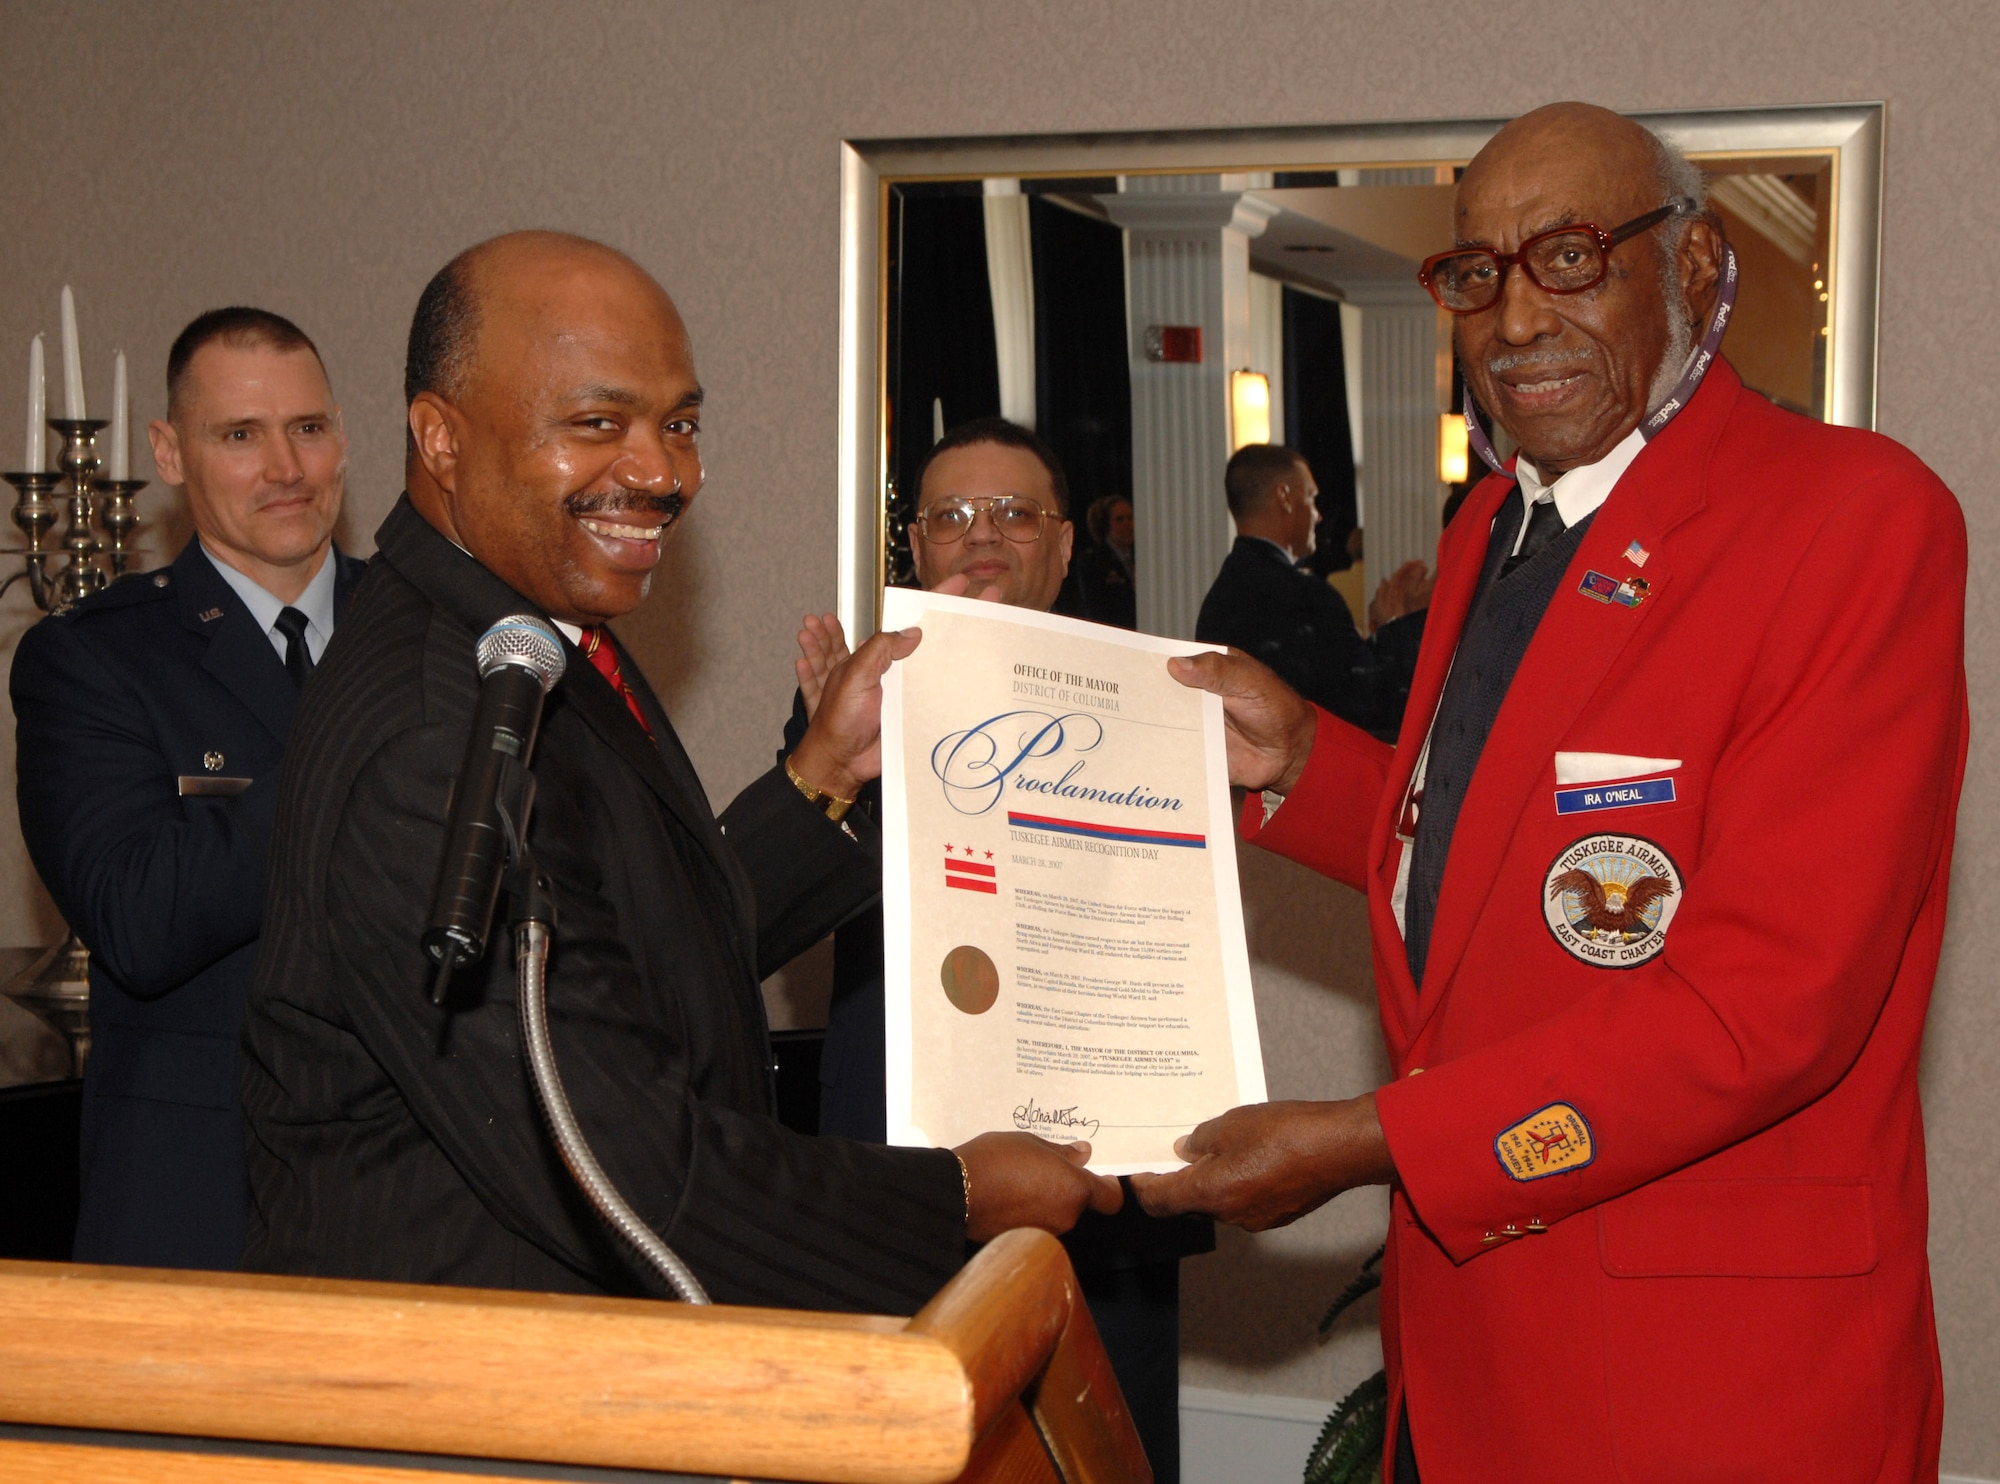 Kerwin Miller, executive office of Veterans Affairs, presents Ira O'Neal with a proclamation paper declaring Tuskegee Airman Day in Washington, D.C., at the dedication ceremony of the "Tuskegee Room" at the Bolling Air Force Base Club March 28. The Tuskegee Airmen received the Congressional Gold Medal from President George W. Bush March 29, the highest civilian honor bestowed by Congress. (U.S. Air Force photo/Airman 1st Class Timothy Chacon)